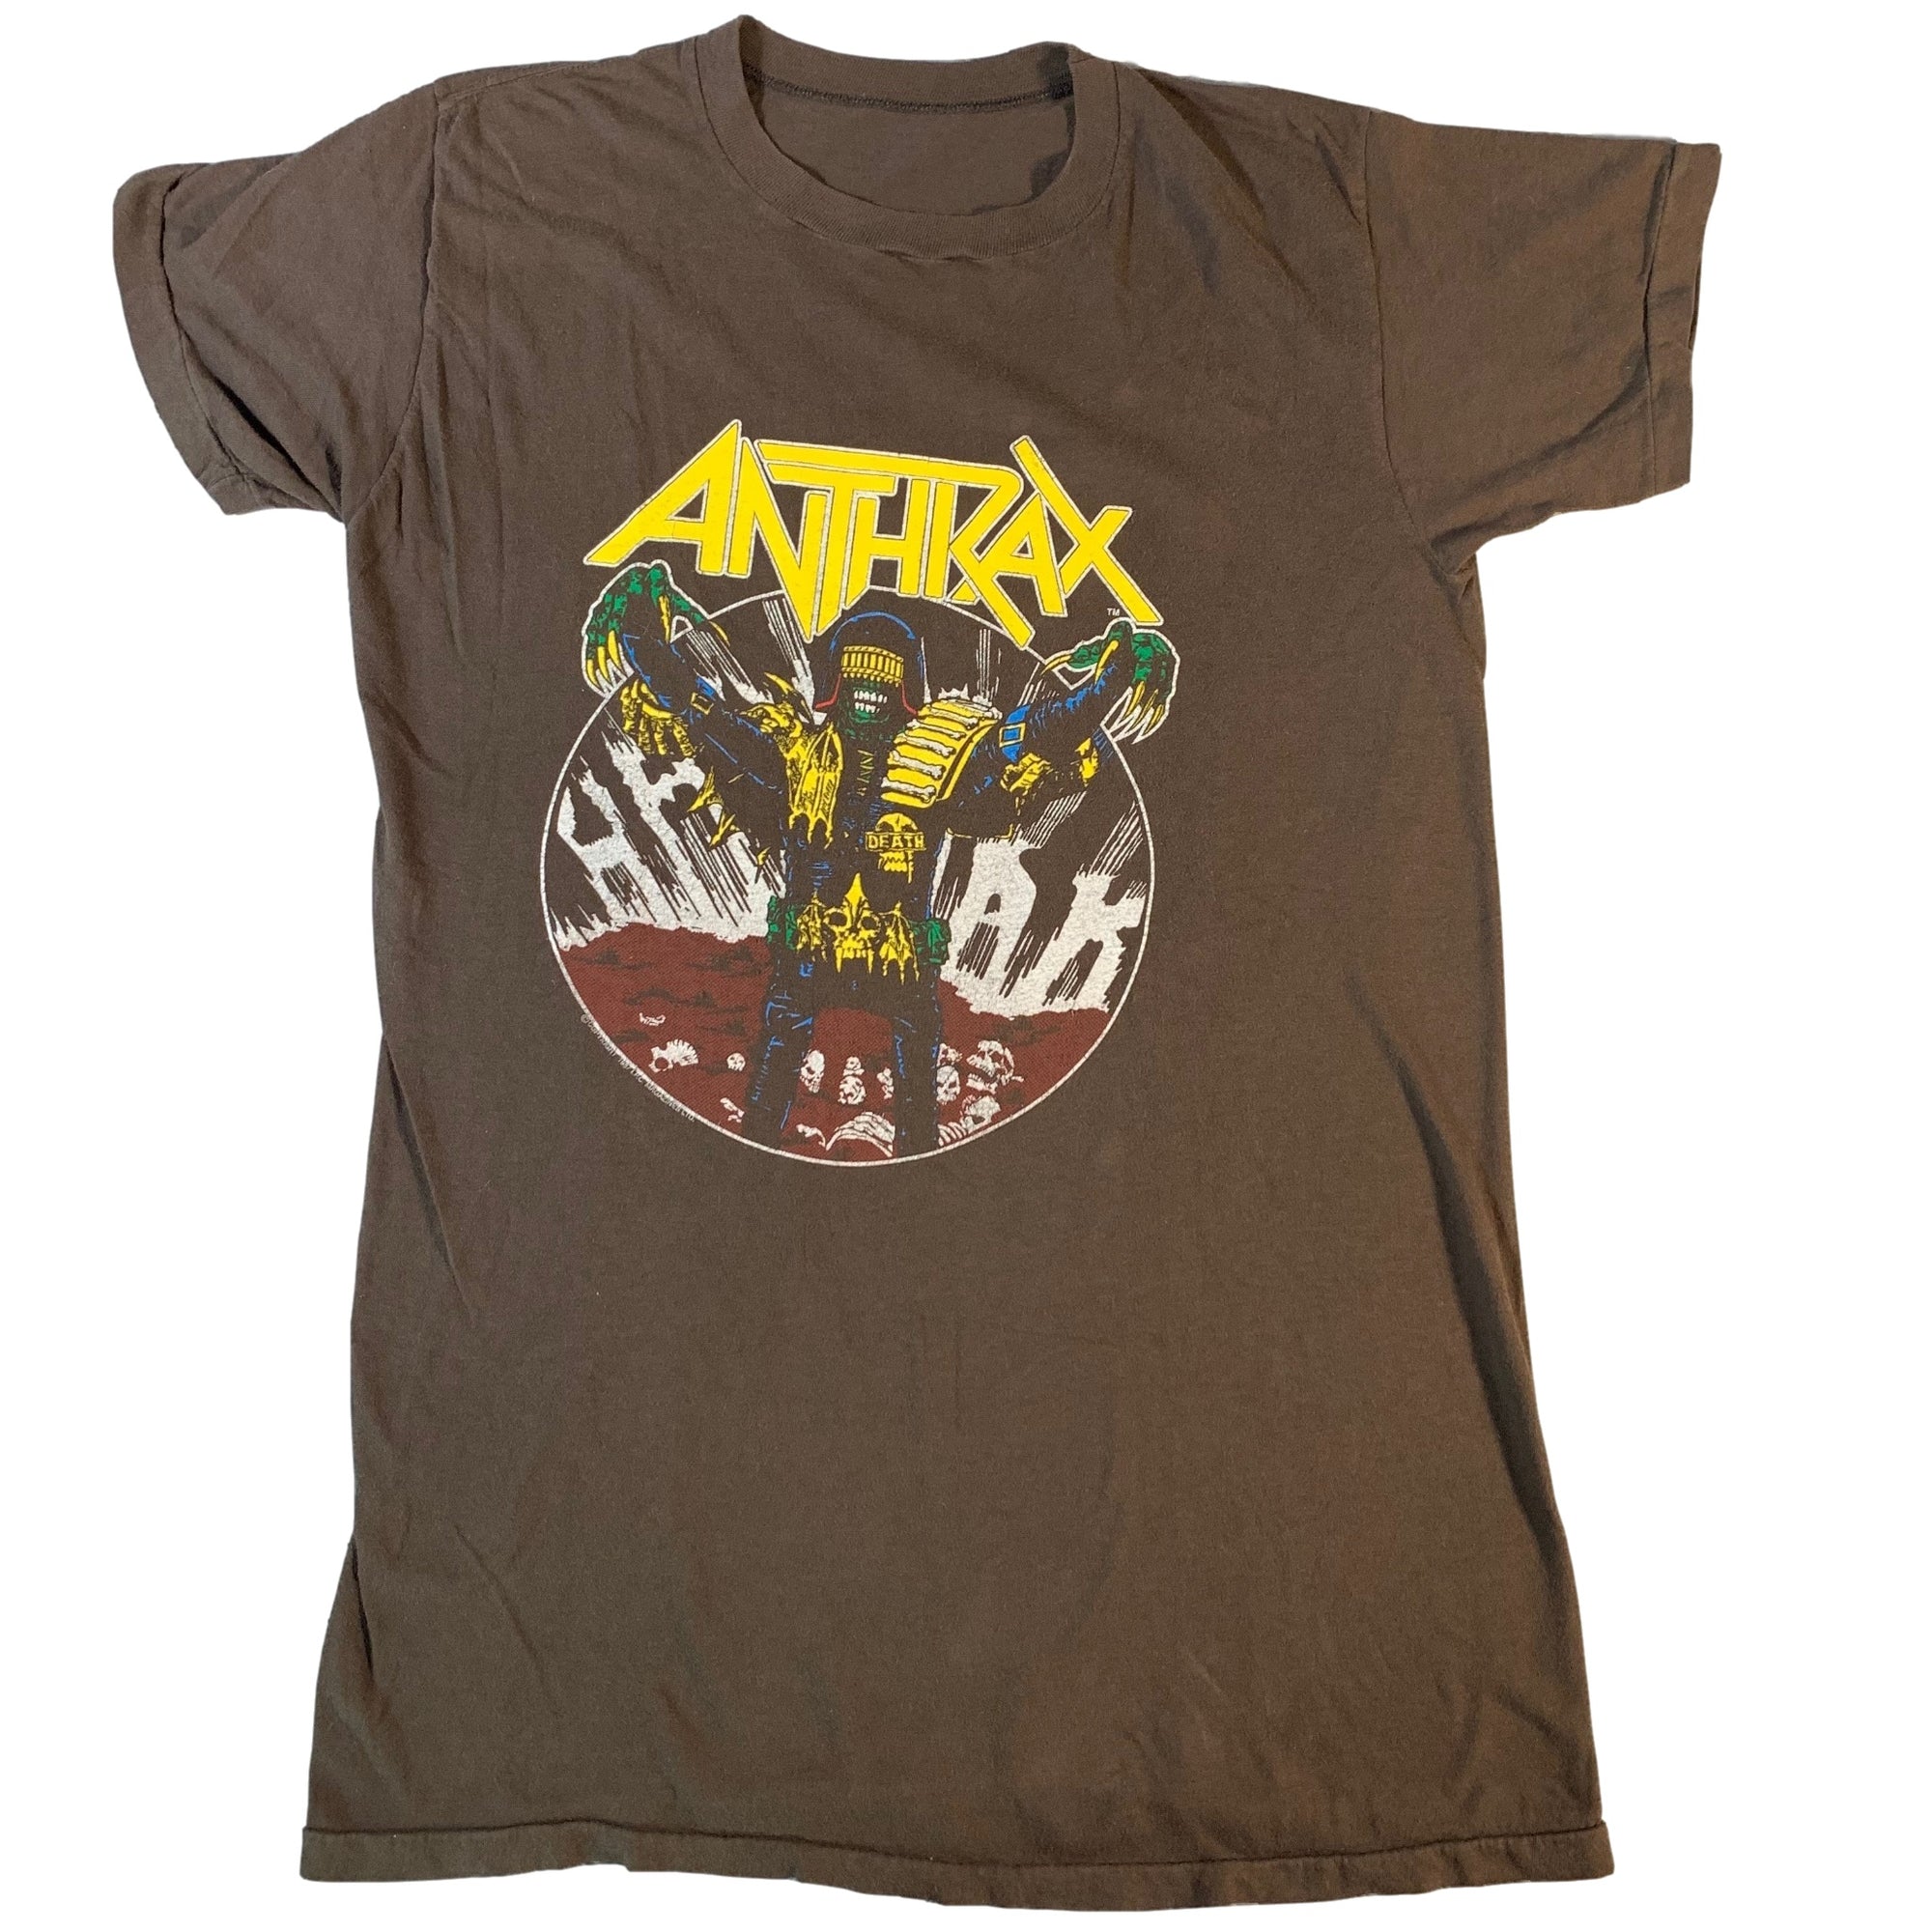 Vintage Anthrax "I Am The Law" T-Shirt - jointcustodydc